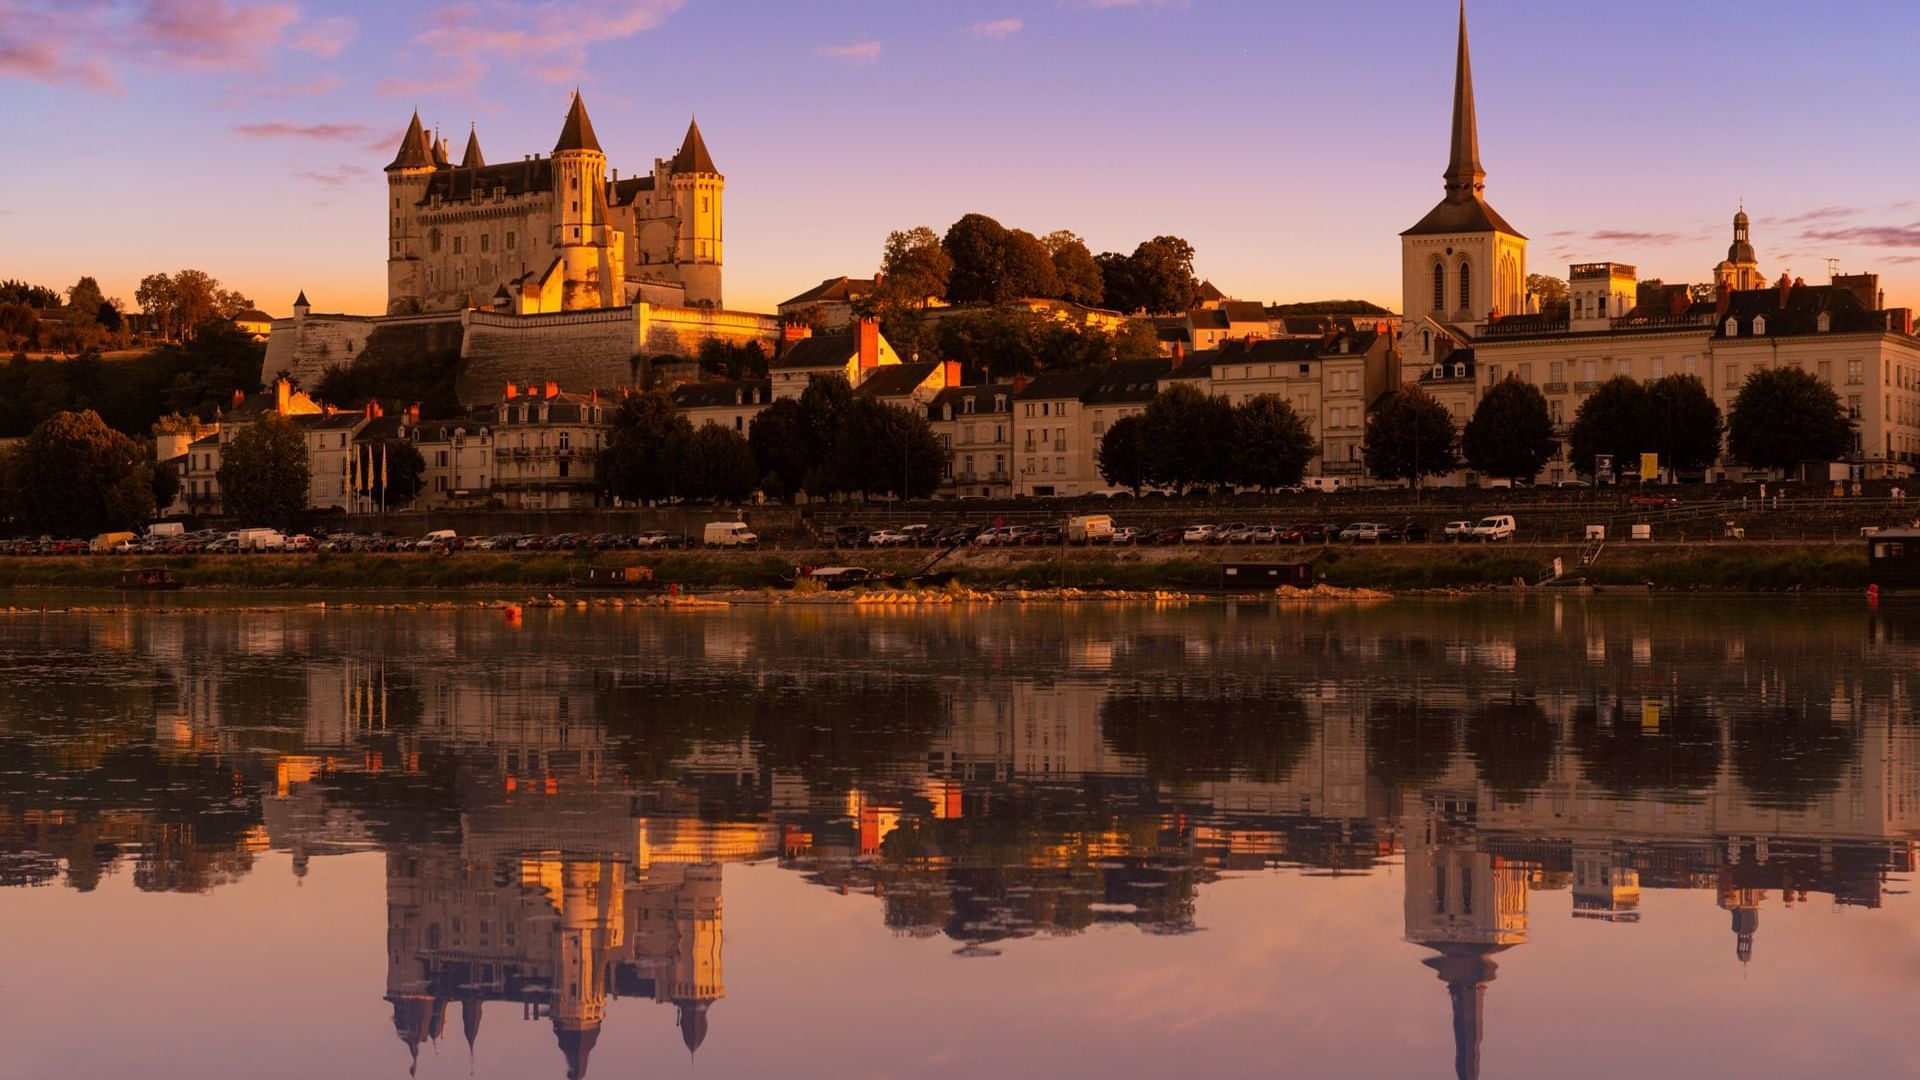 Saumur city by the lake in the evening near Originals Hotels